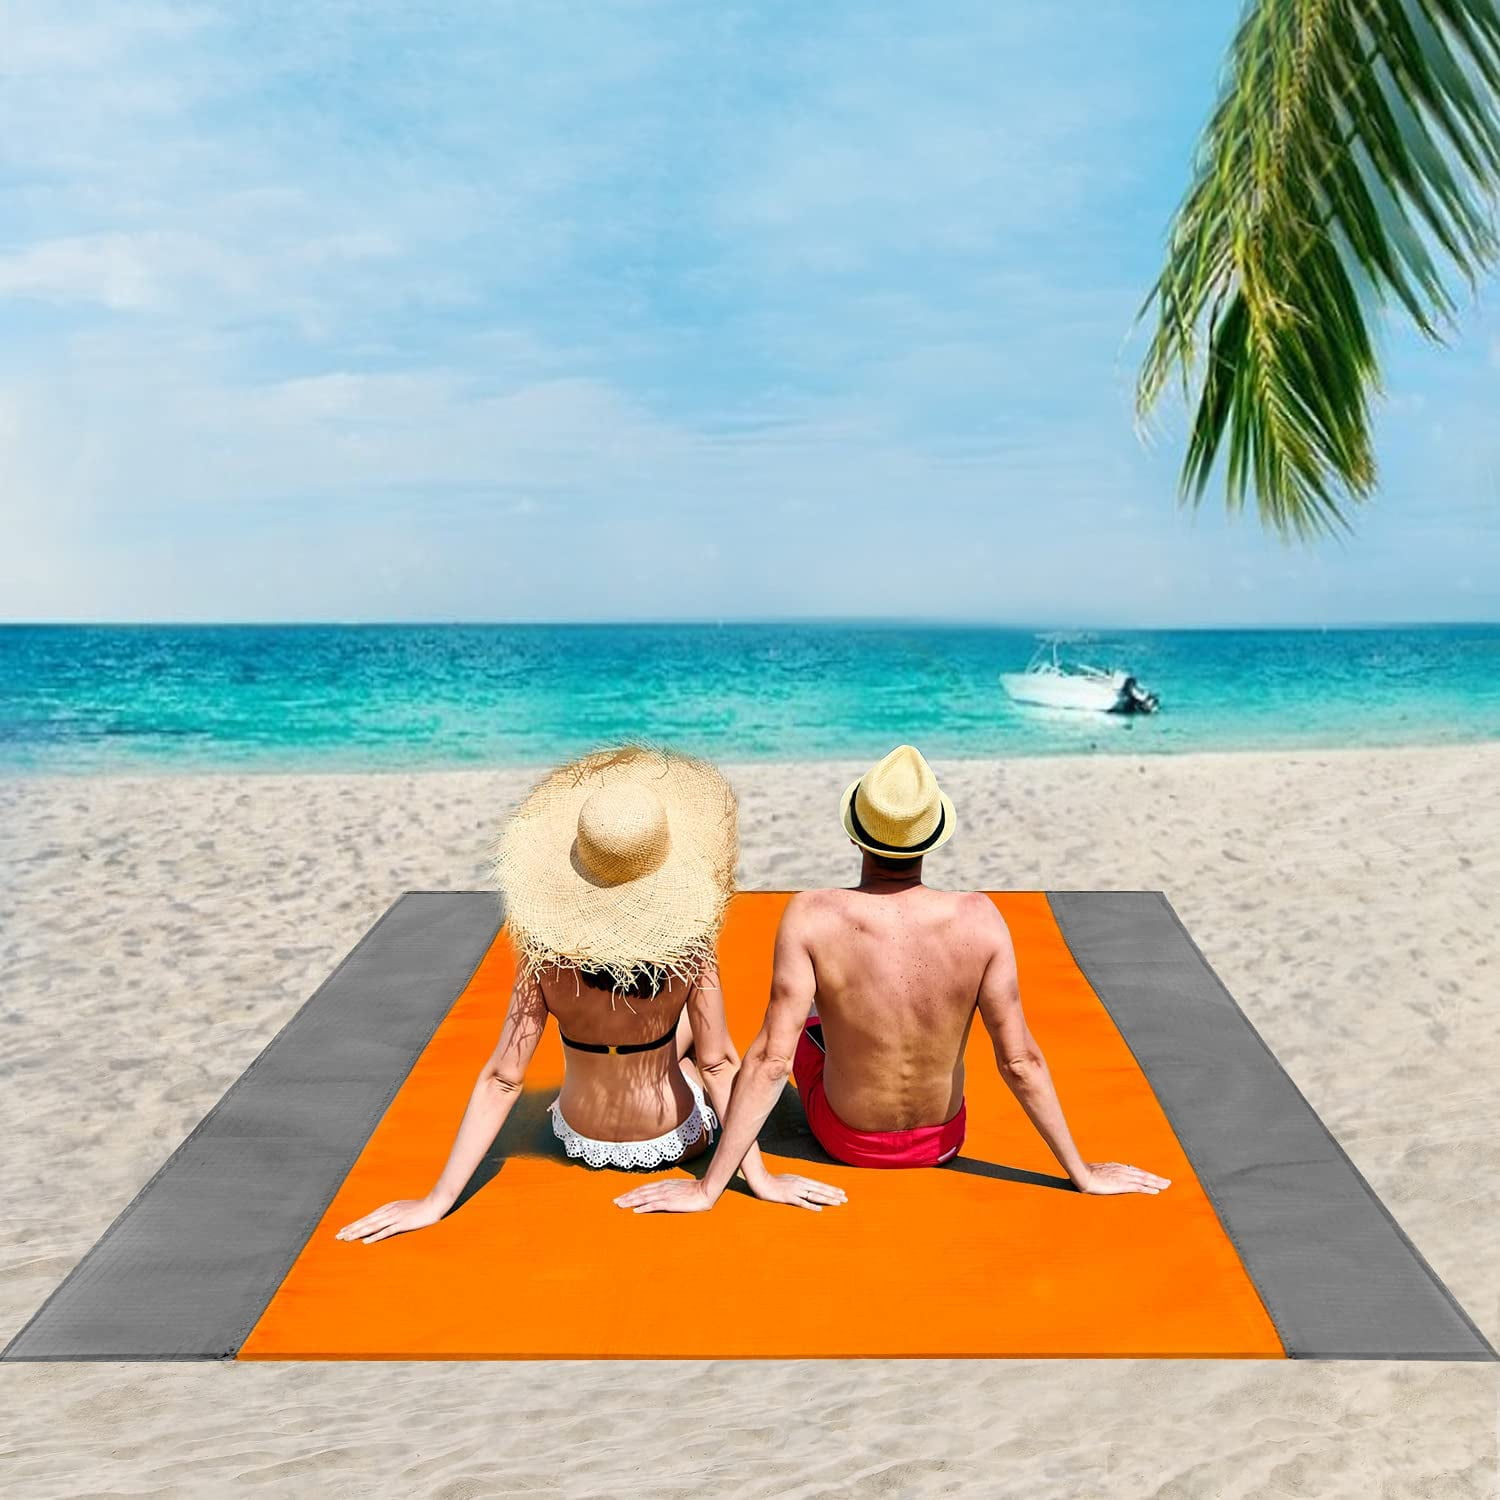 58 X 58 Cute Dodo Bird Picnic Mat Creative Round Outdoor Camping Beach Yoga Blanket Mats Extra Easy to Clean Small Standard Size Portable for Family Boys Girls Youth Concerts 